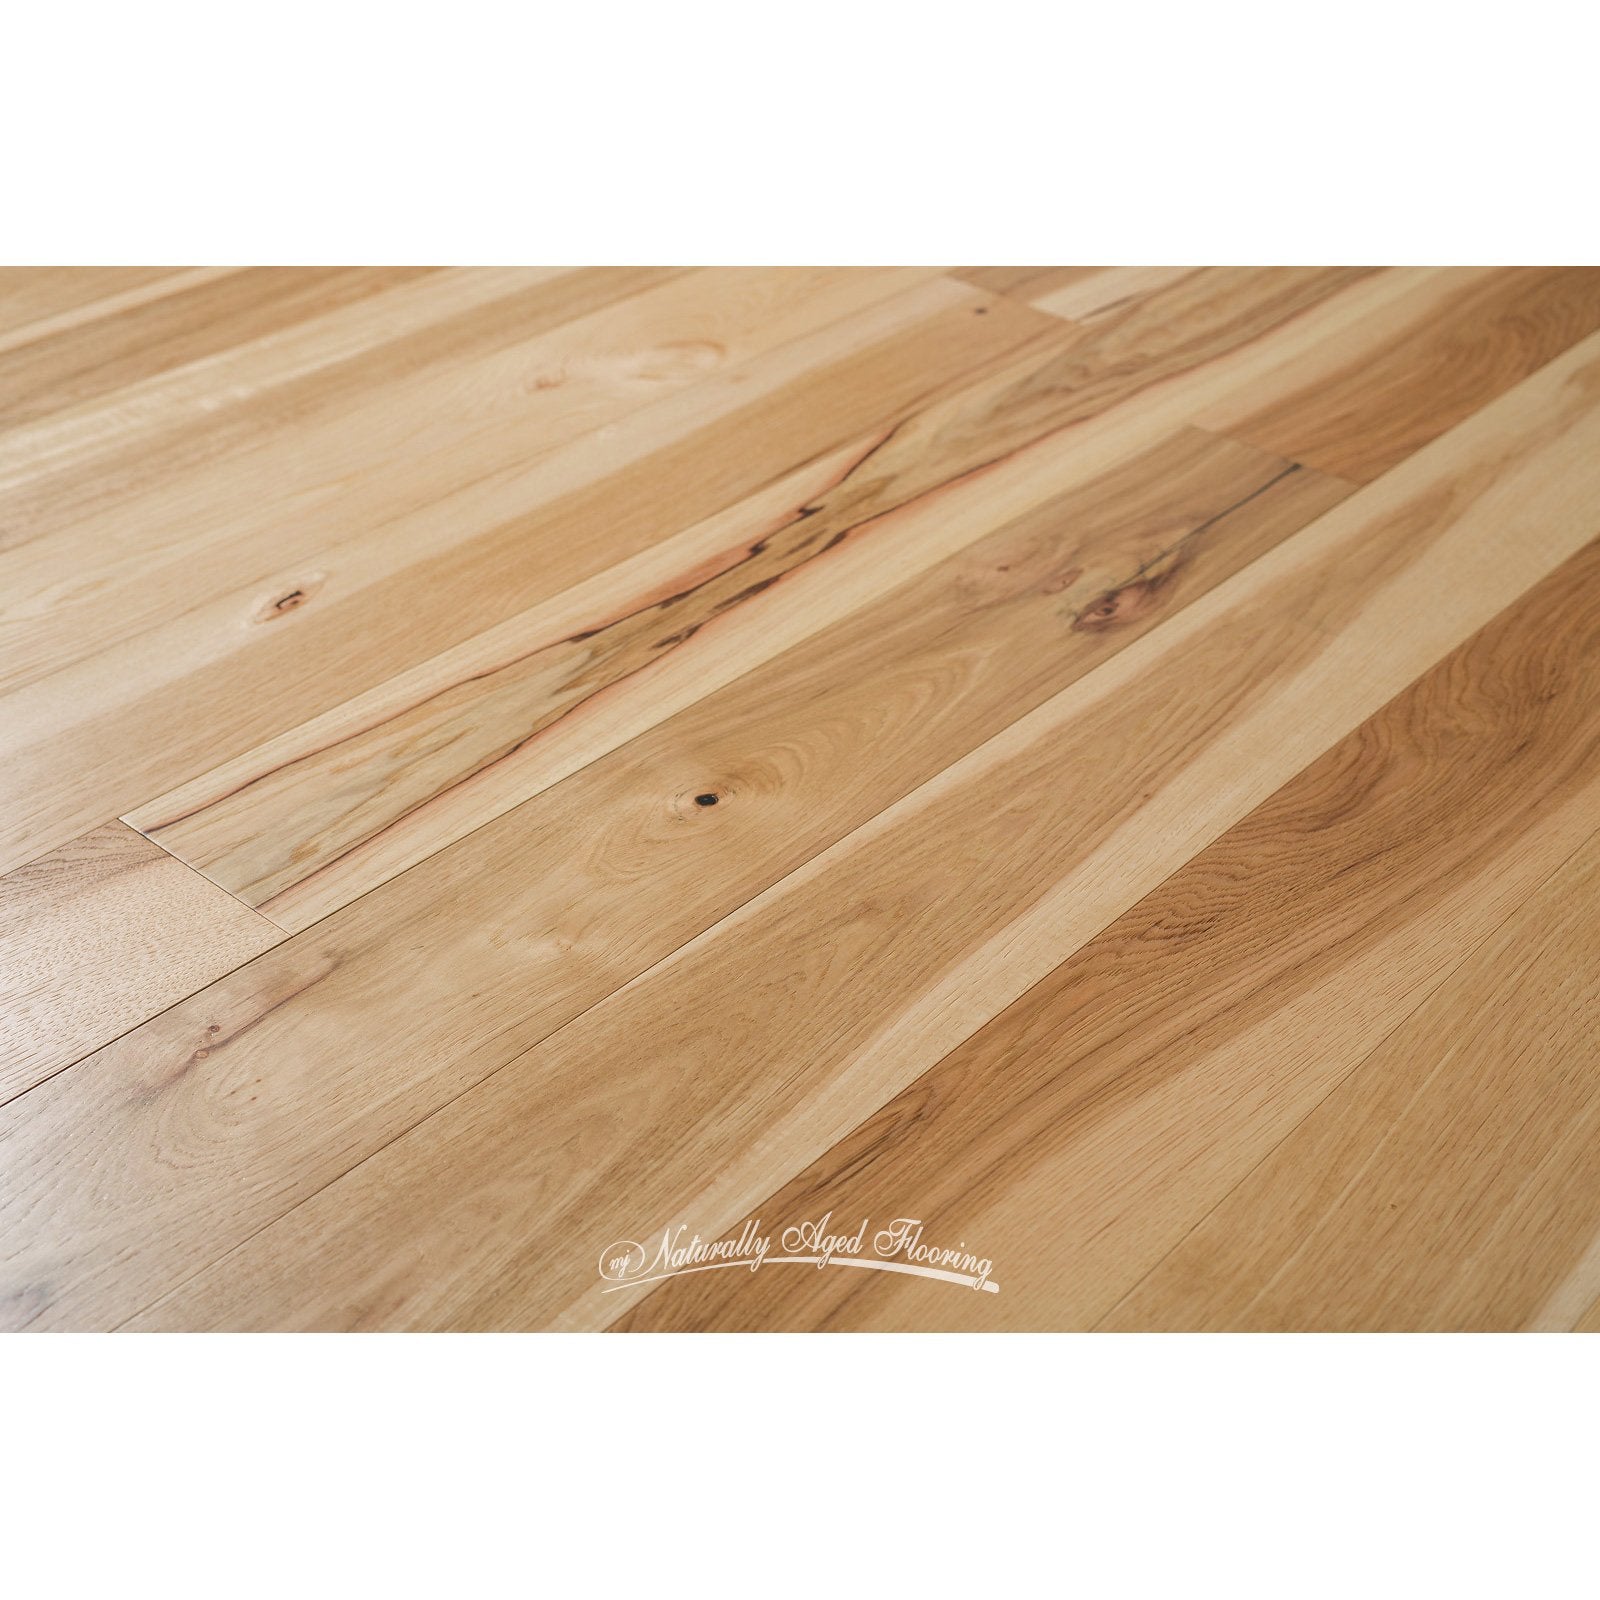 Naturally Aged Flooring - Royal Collection- Wire Brushed Hickory Engineered Hardwood - Grove